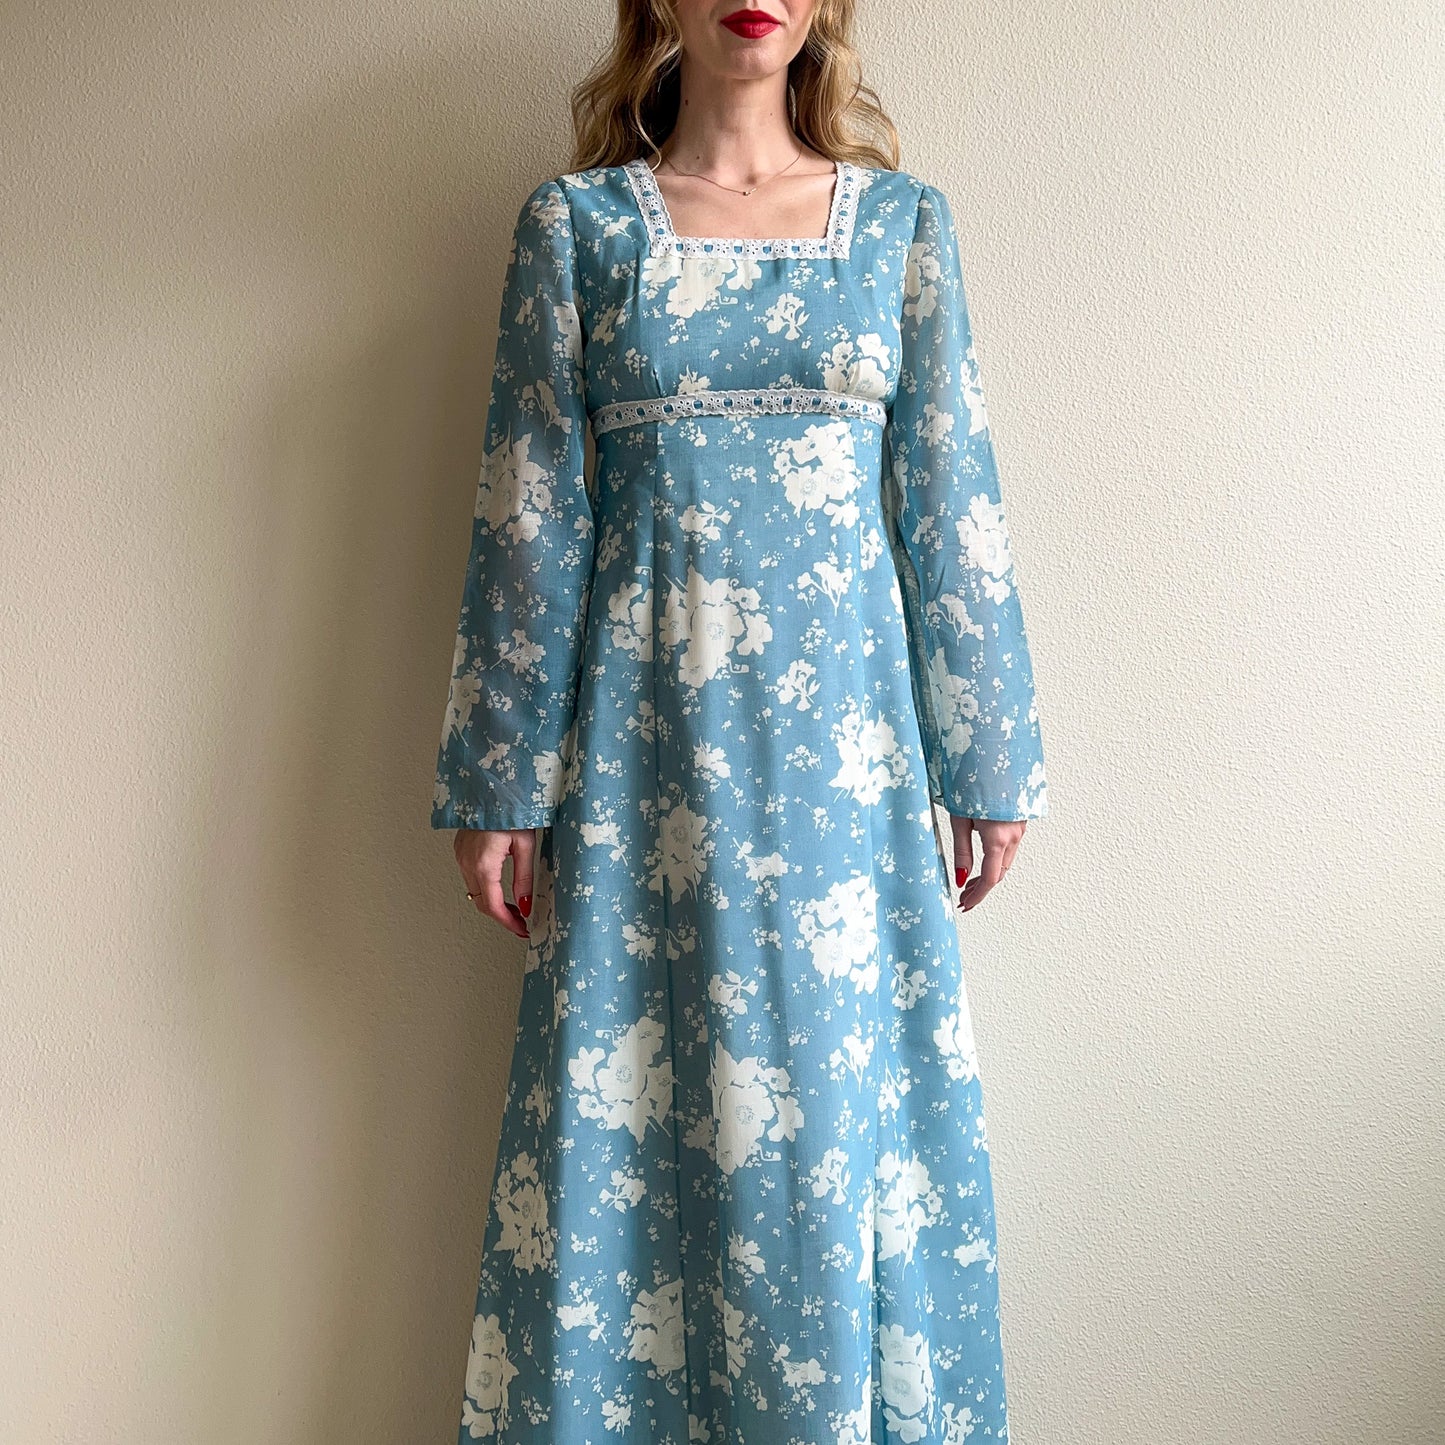 Charming 1970s Blue and White Pattern Maxi Dress (S/M)